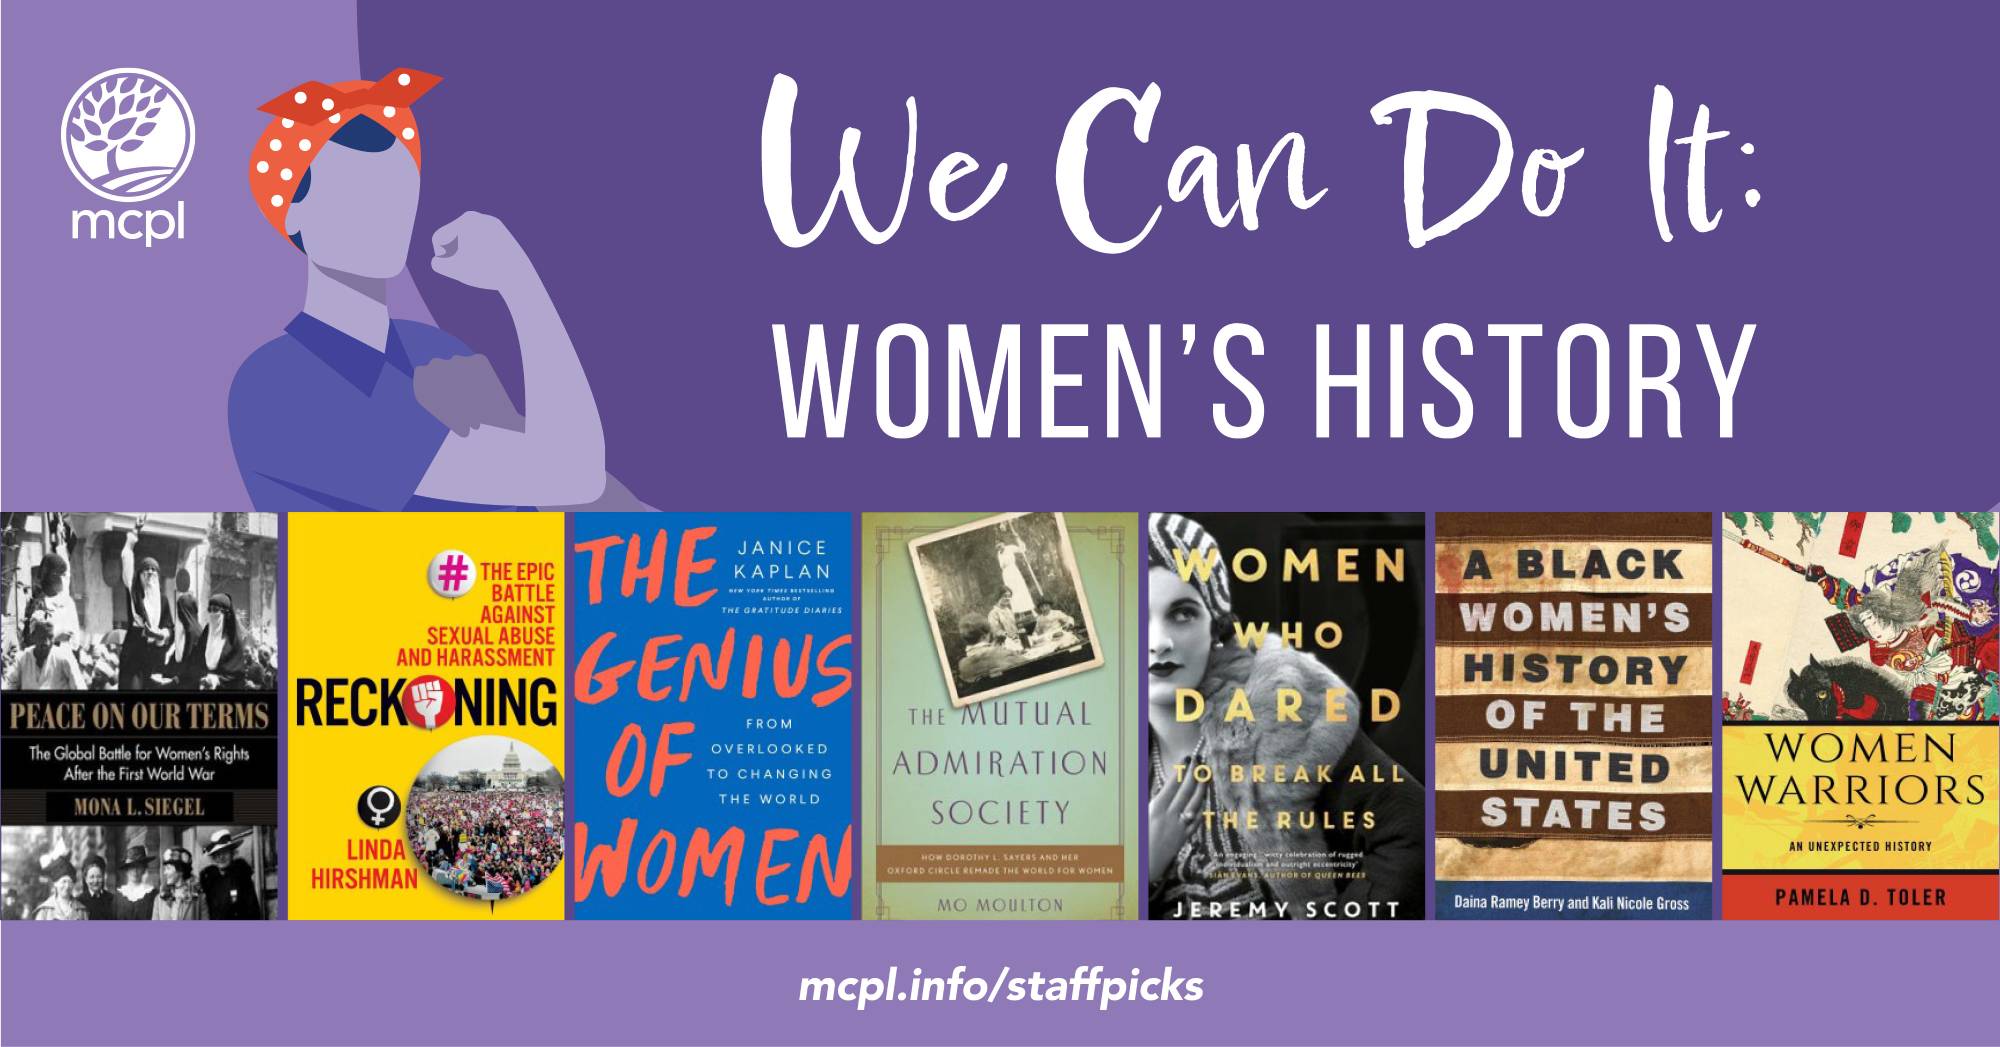 We Can Do It: Women's History